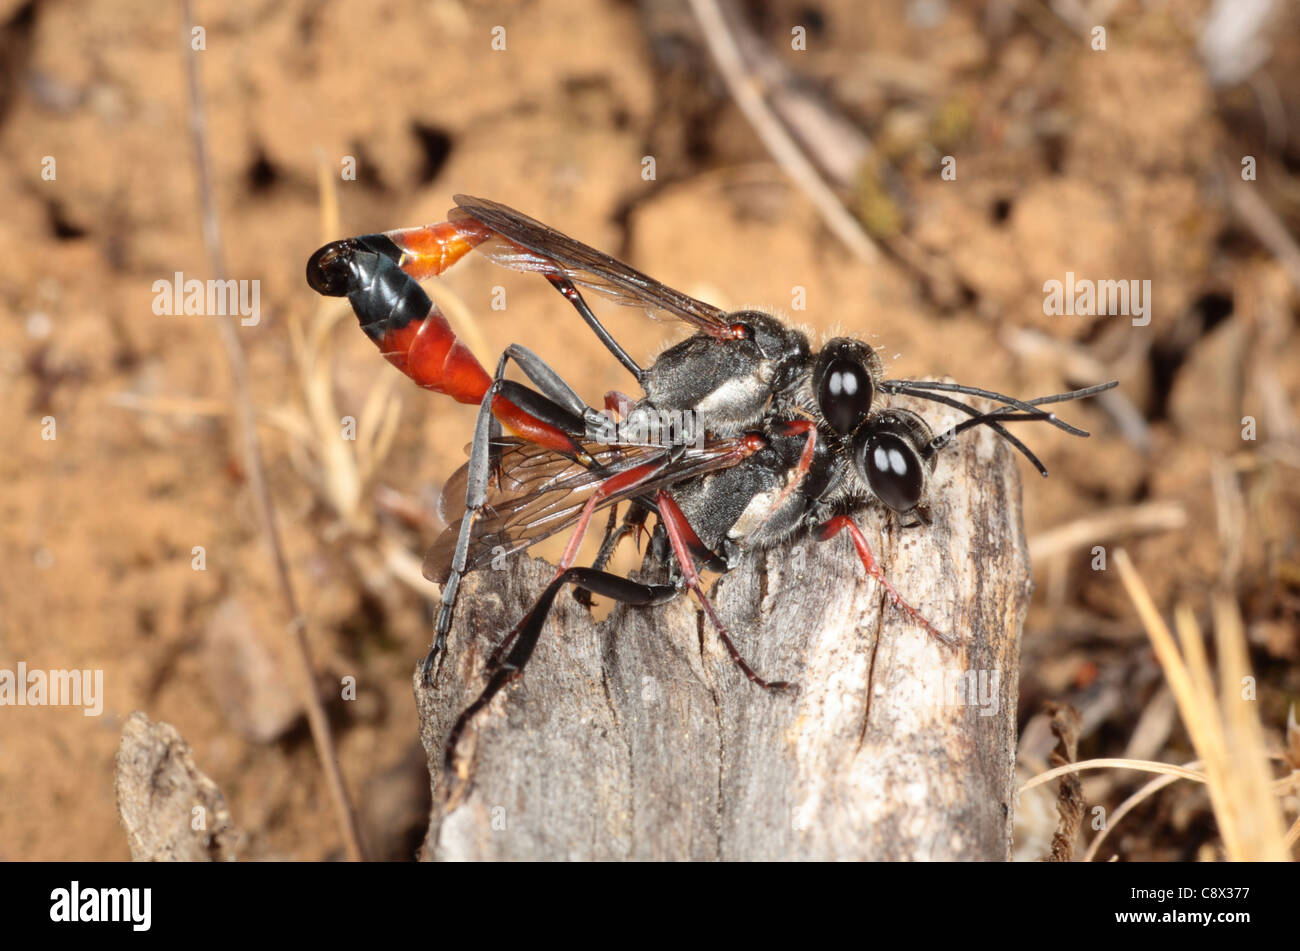 Mating Sand Wasps (Ammophila species). Ariege Pyrenees, France. May. Stock Photo